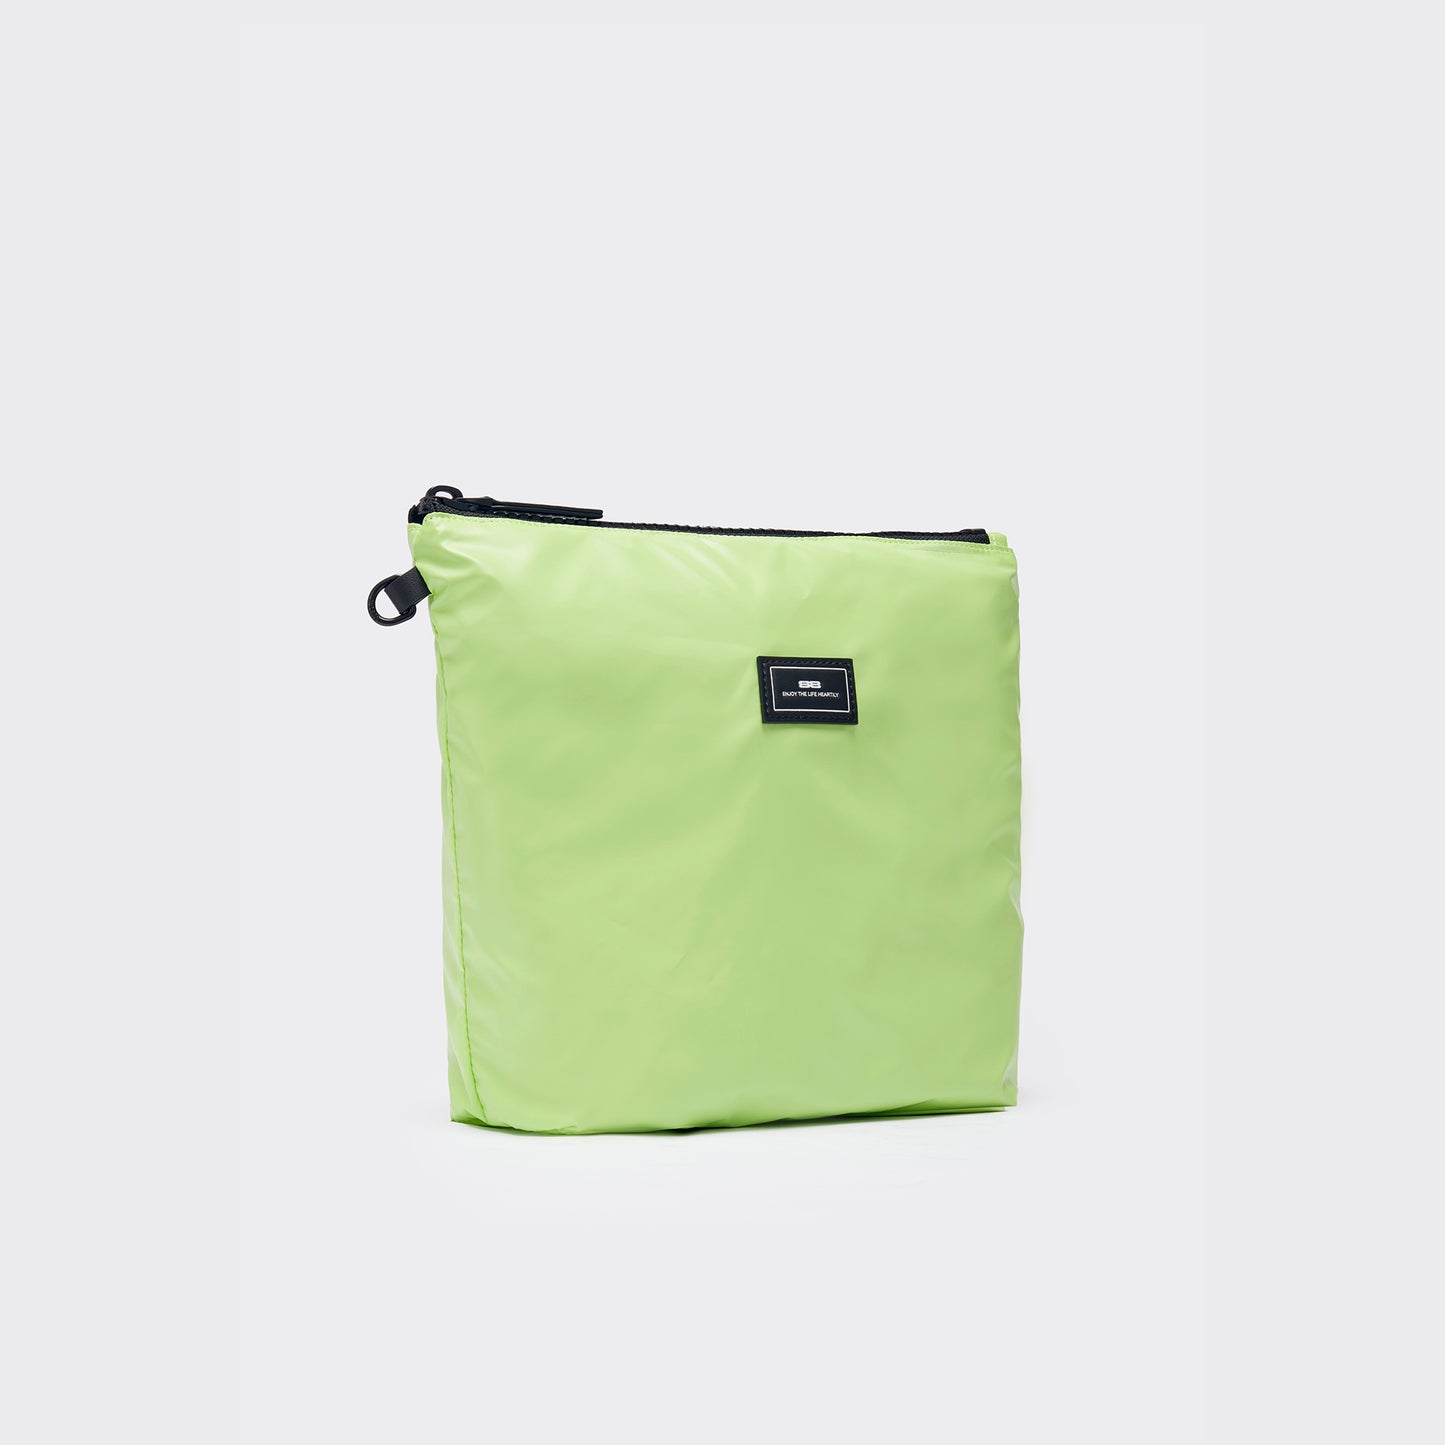 Raphael Large size Tote - Green